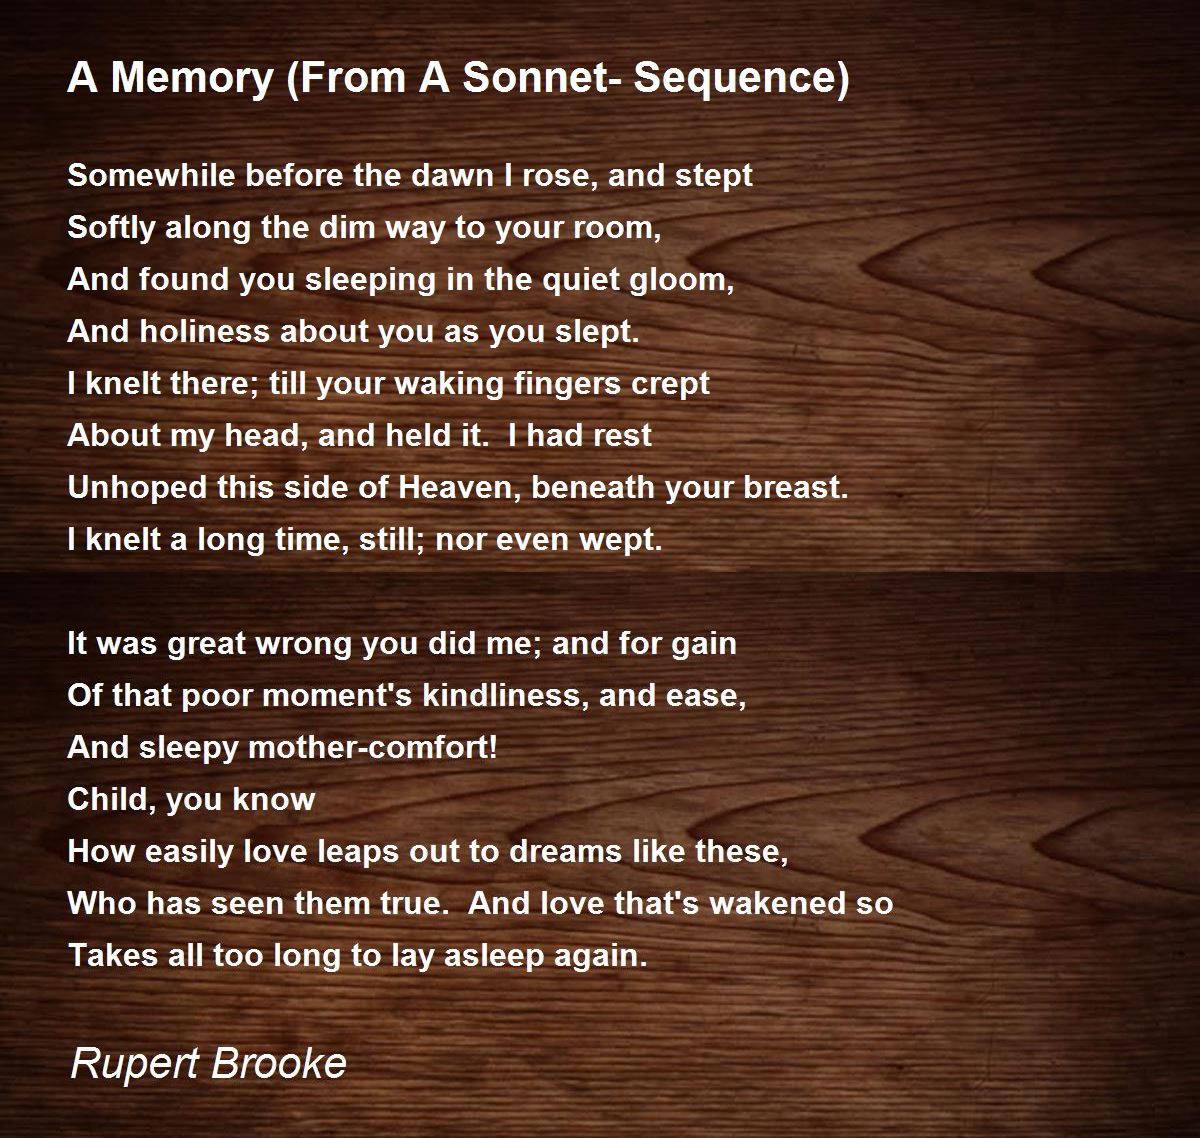 what is a sonnet poem example